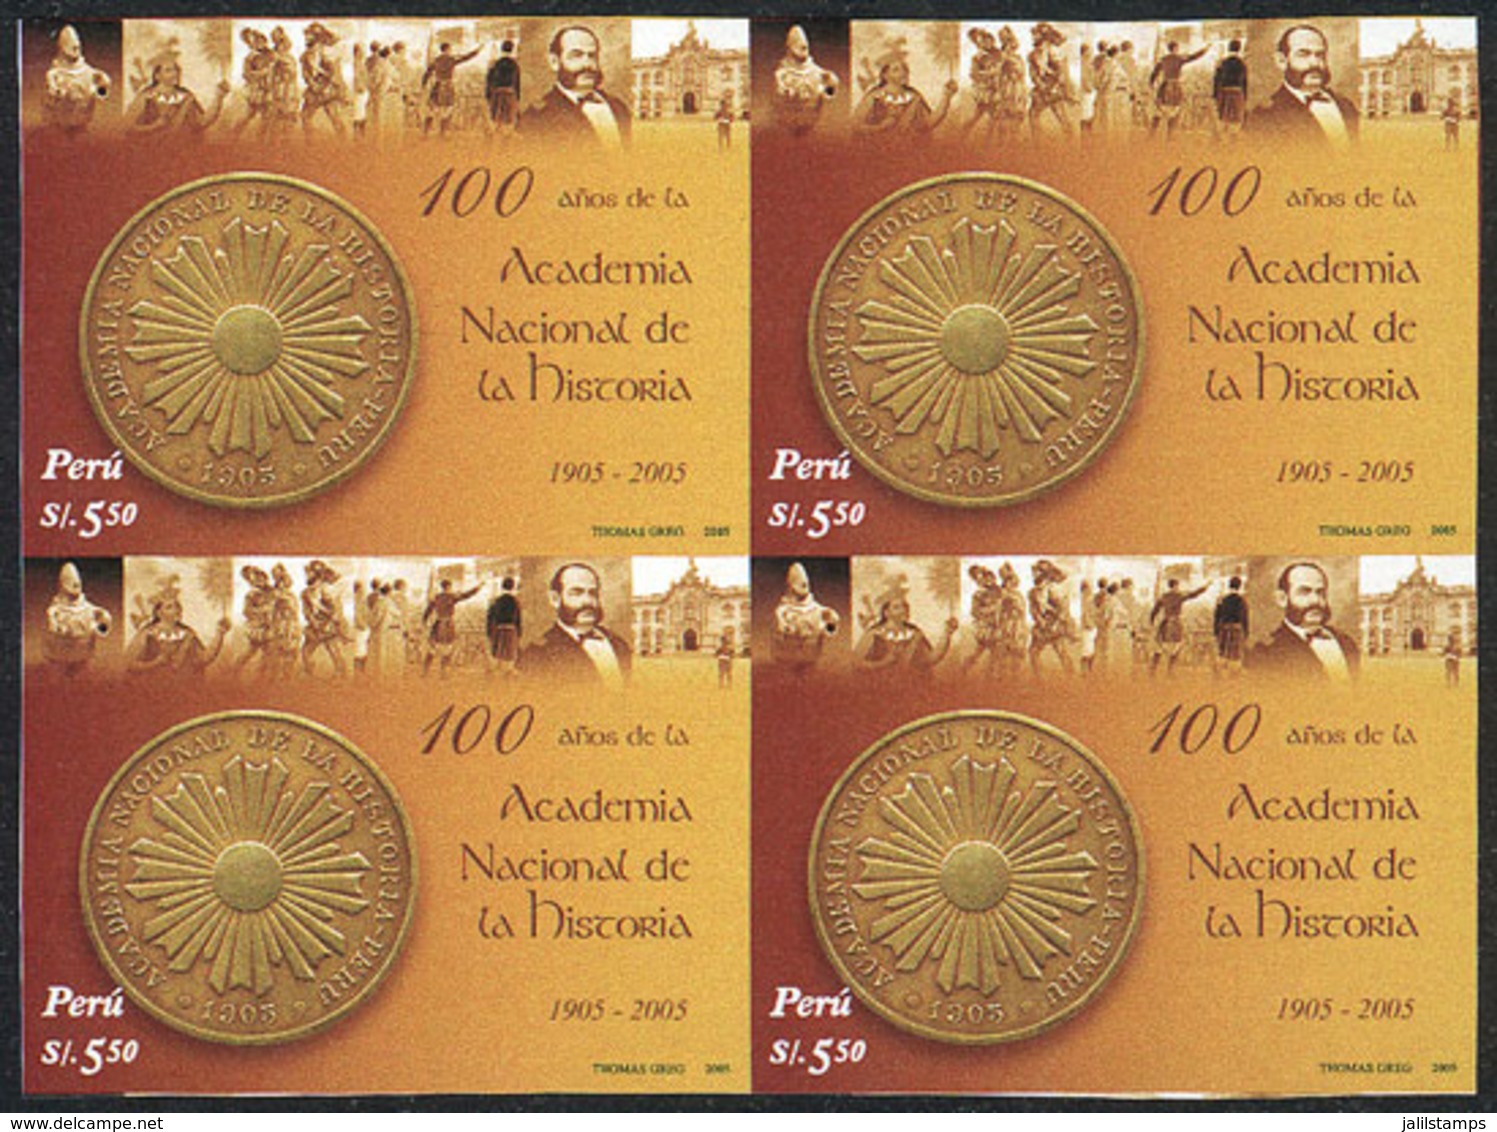 1661 PERU: Sc.1492, 2006 National Academy Of History, IMPERFORATE BLOCK OF 4, Excellent Quality, Rare! - Perù